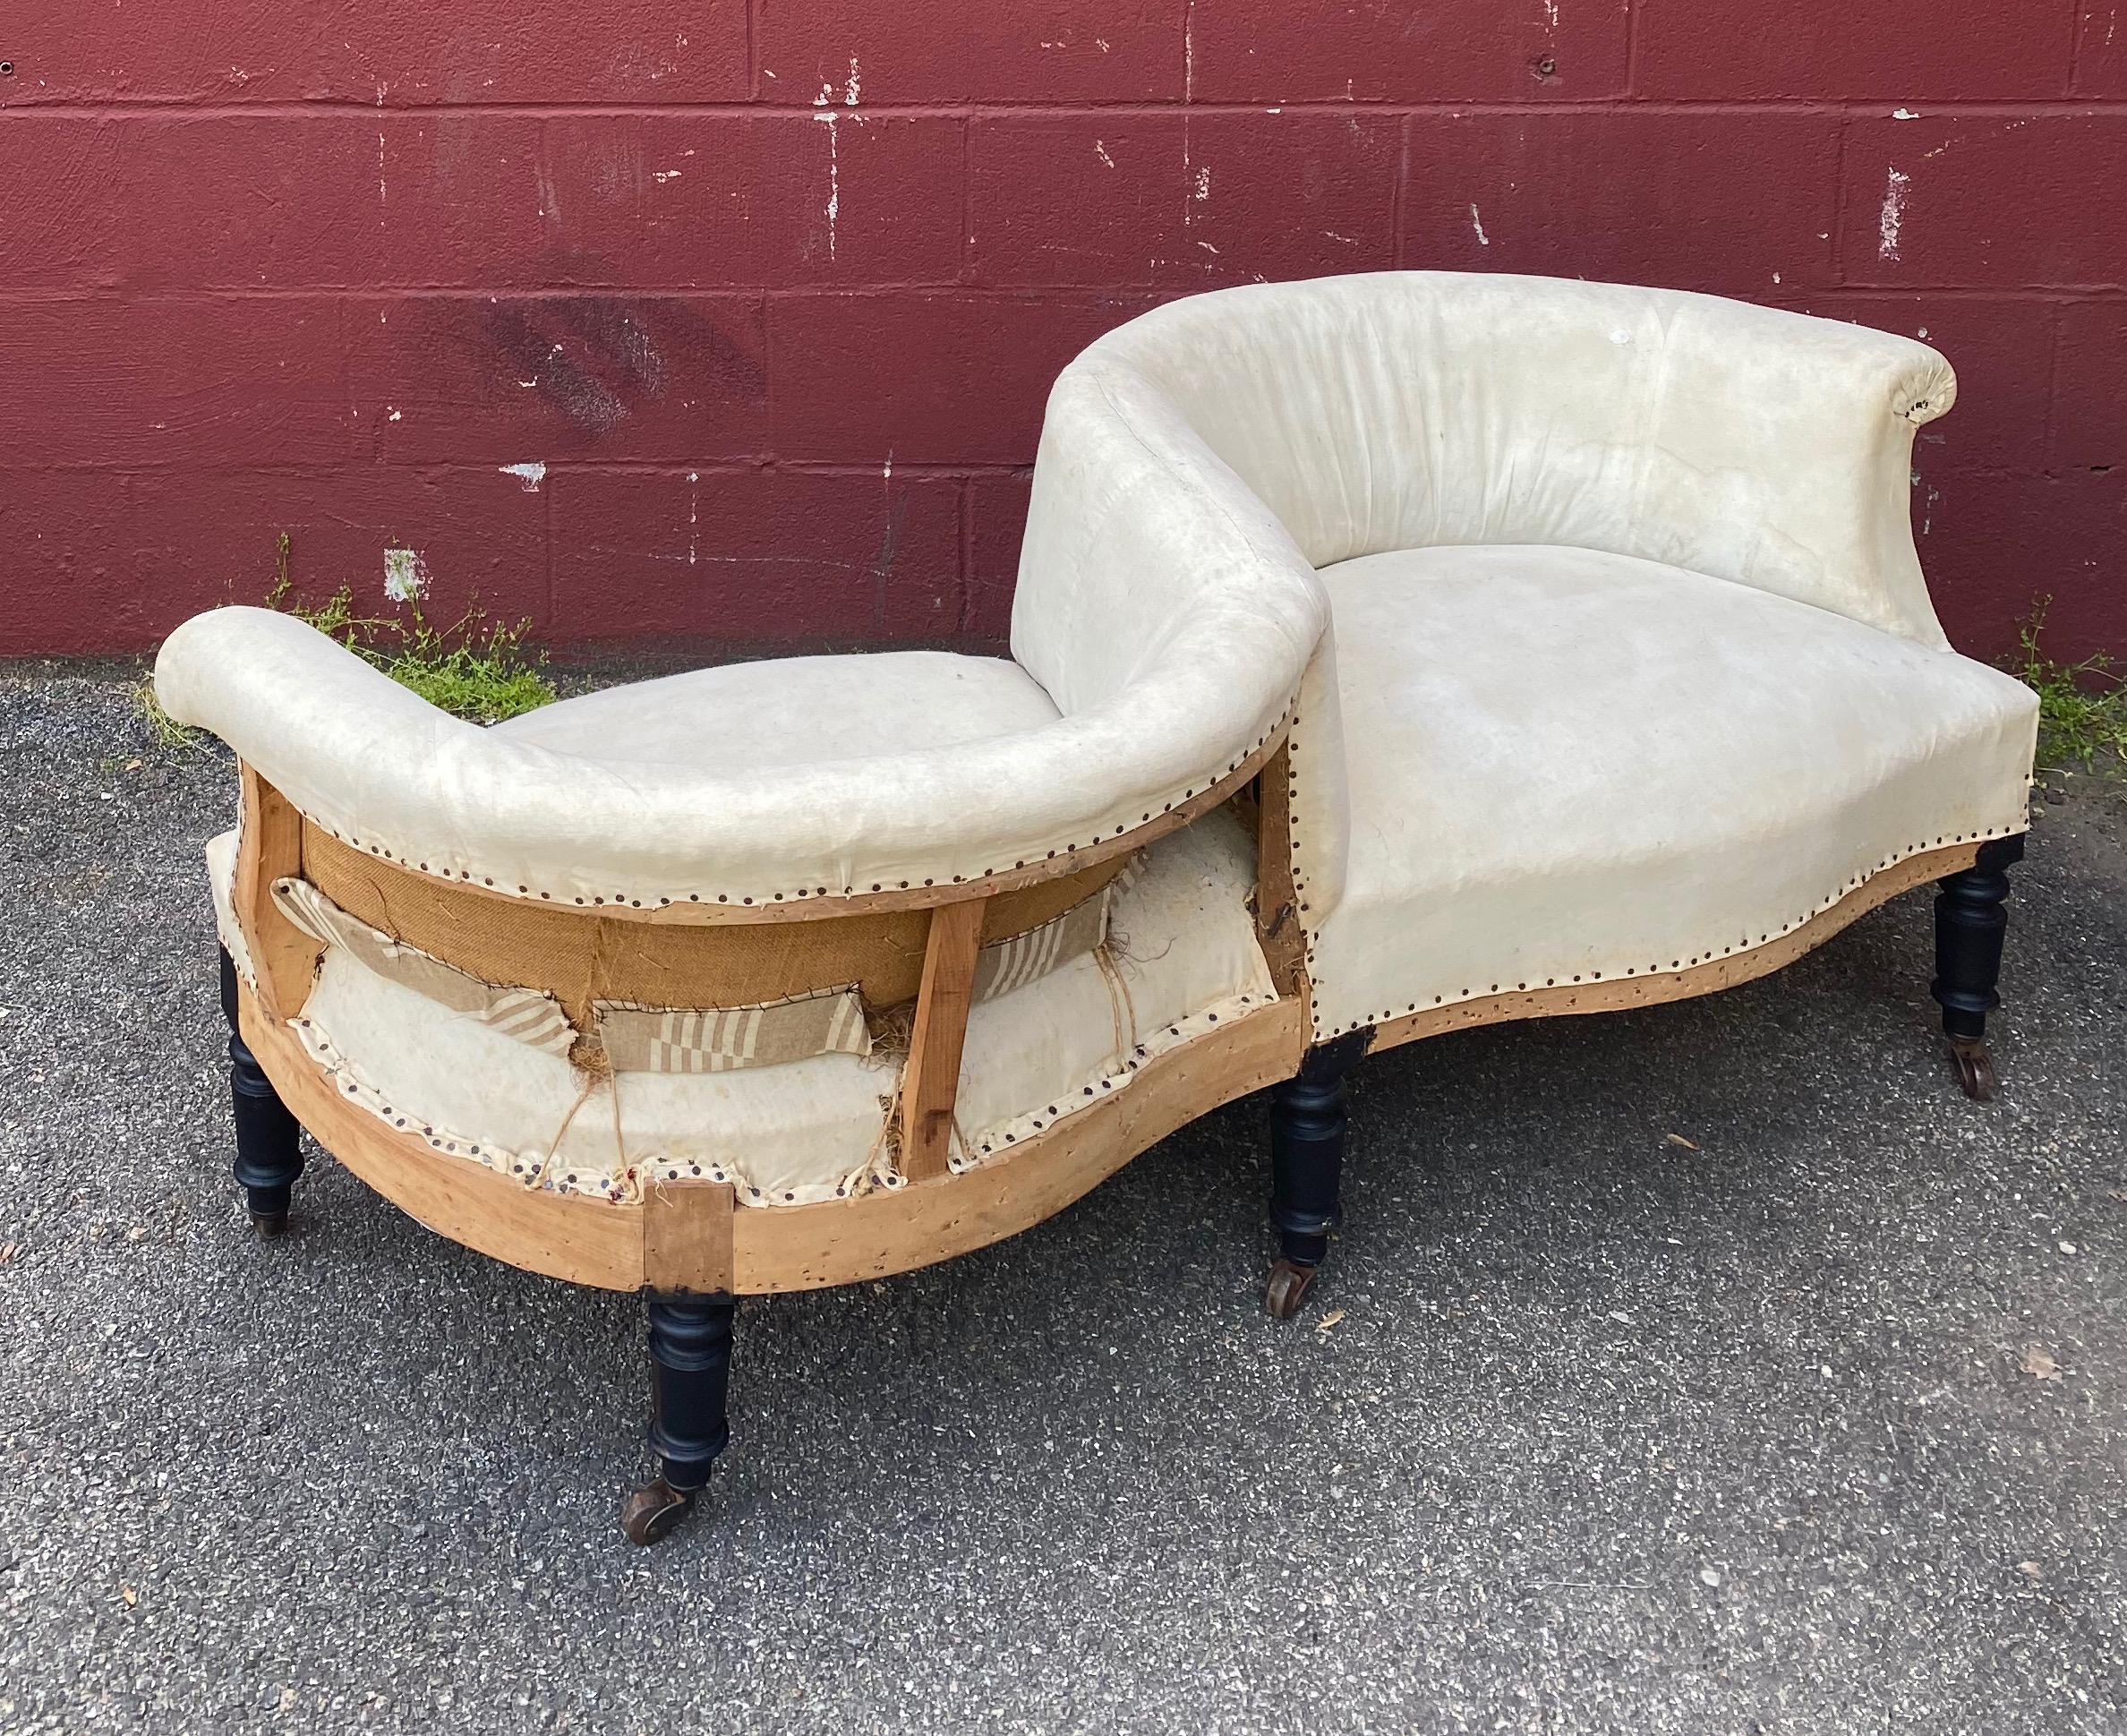 A whimsical and unusual Napoleon III “double”  armchair referred to in French as a Tête-à-Tête, meant to imply an intimate head to head conversation. The opposite facing seats are joined together to from a serpentine form. The piece is ready to